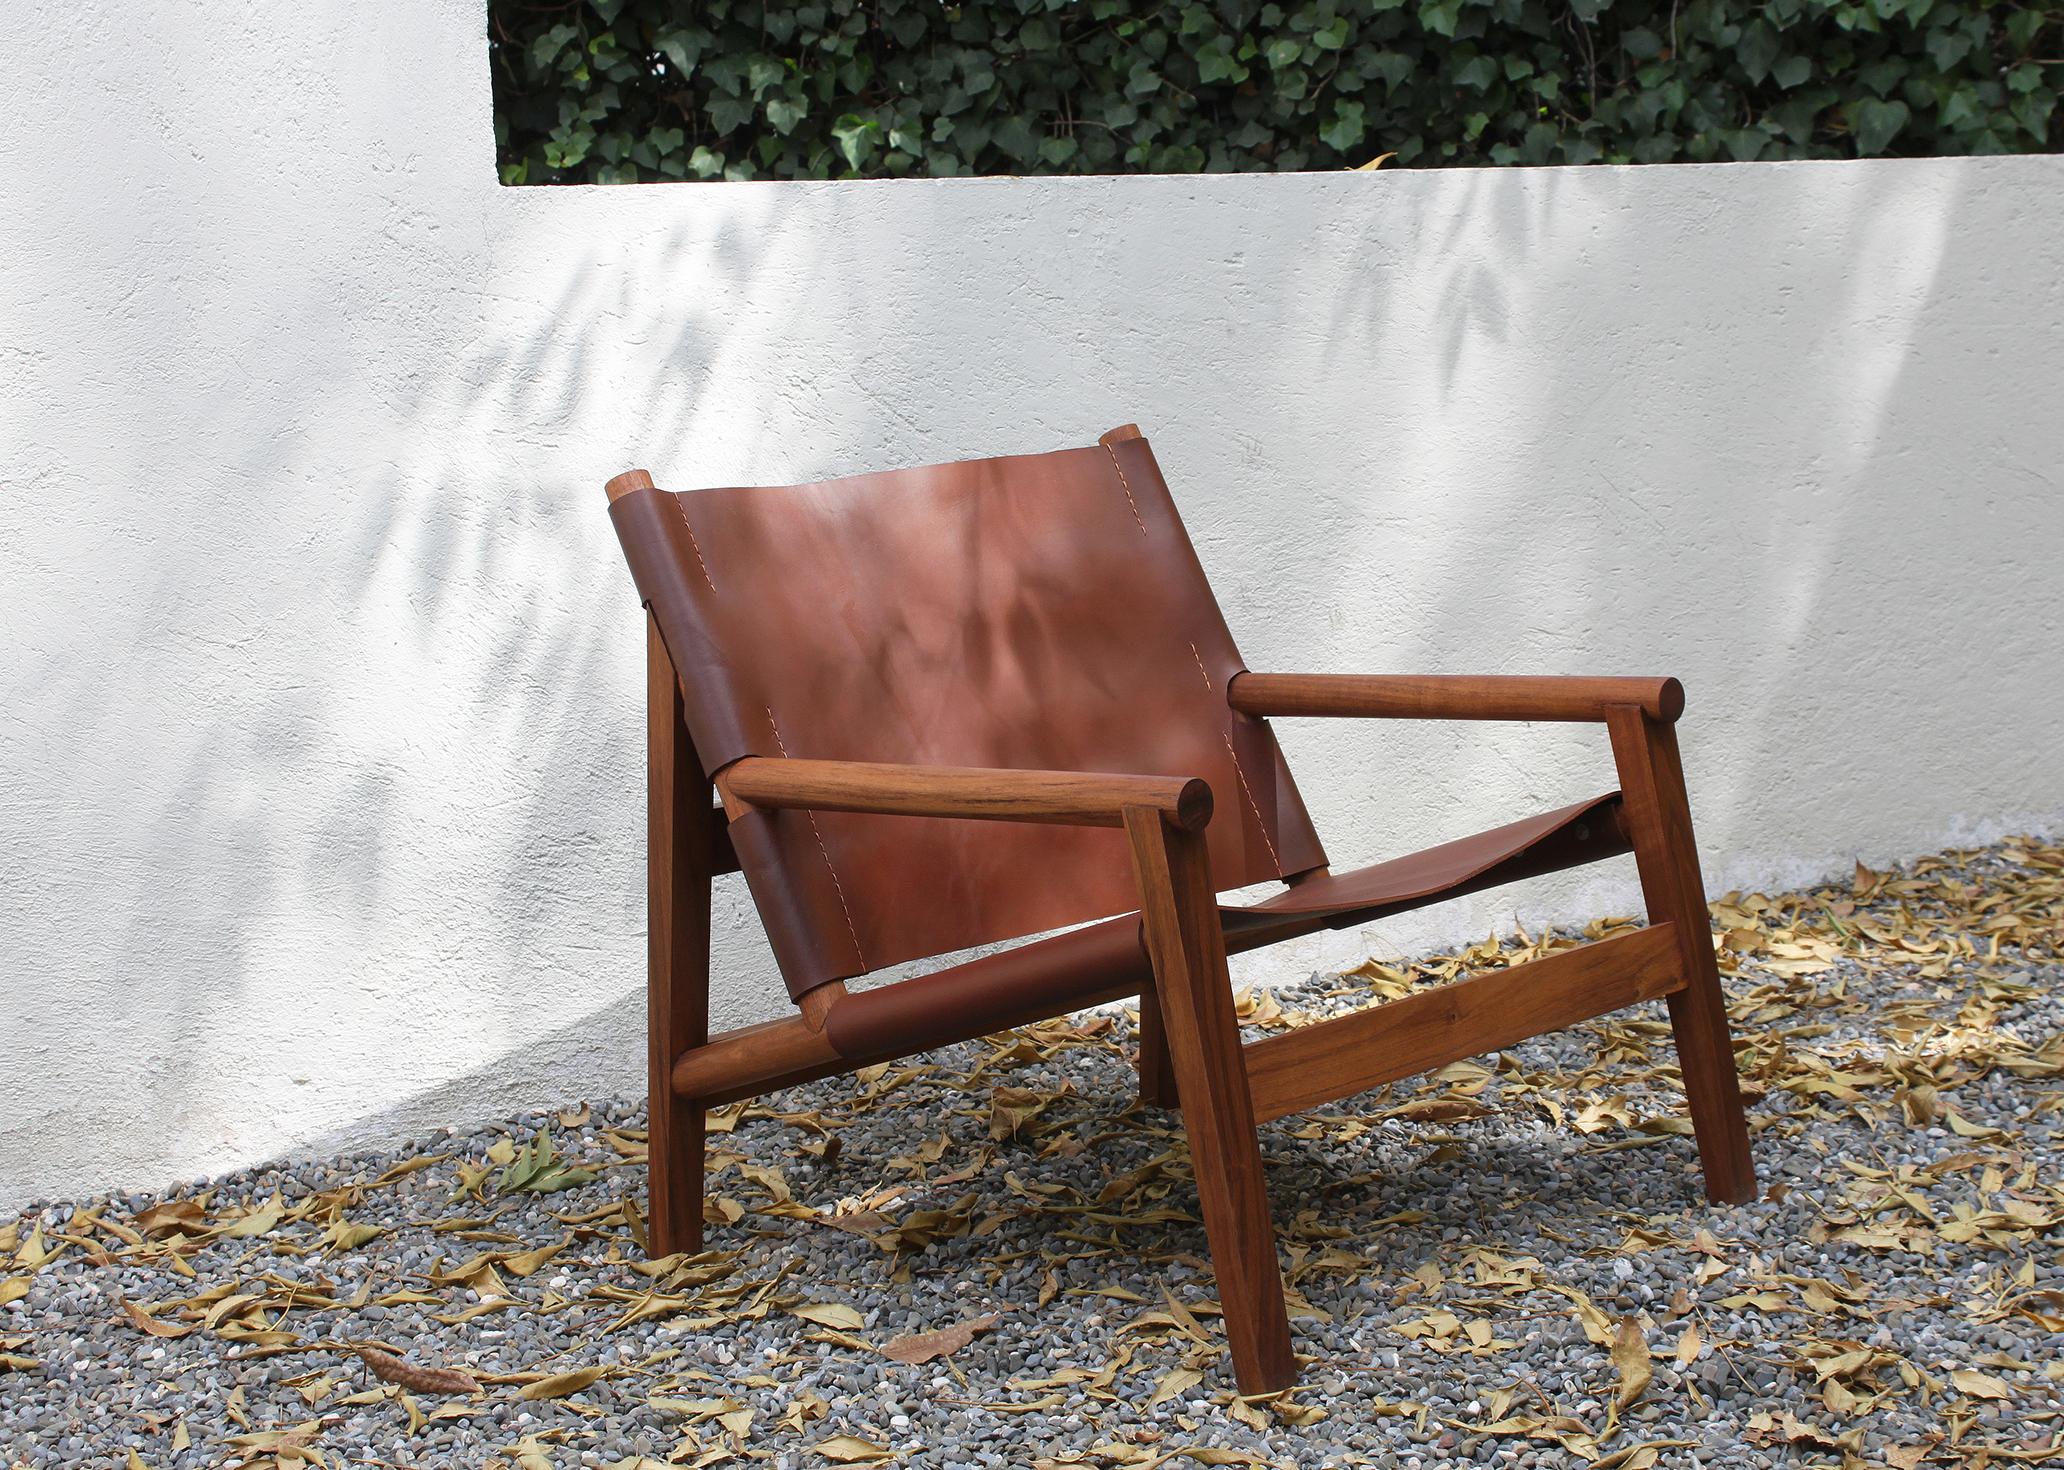 La Colima Chair, Maria Beckmann, Represented by Tuleste Factory 8